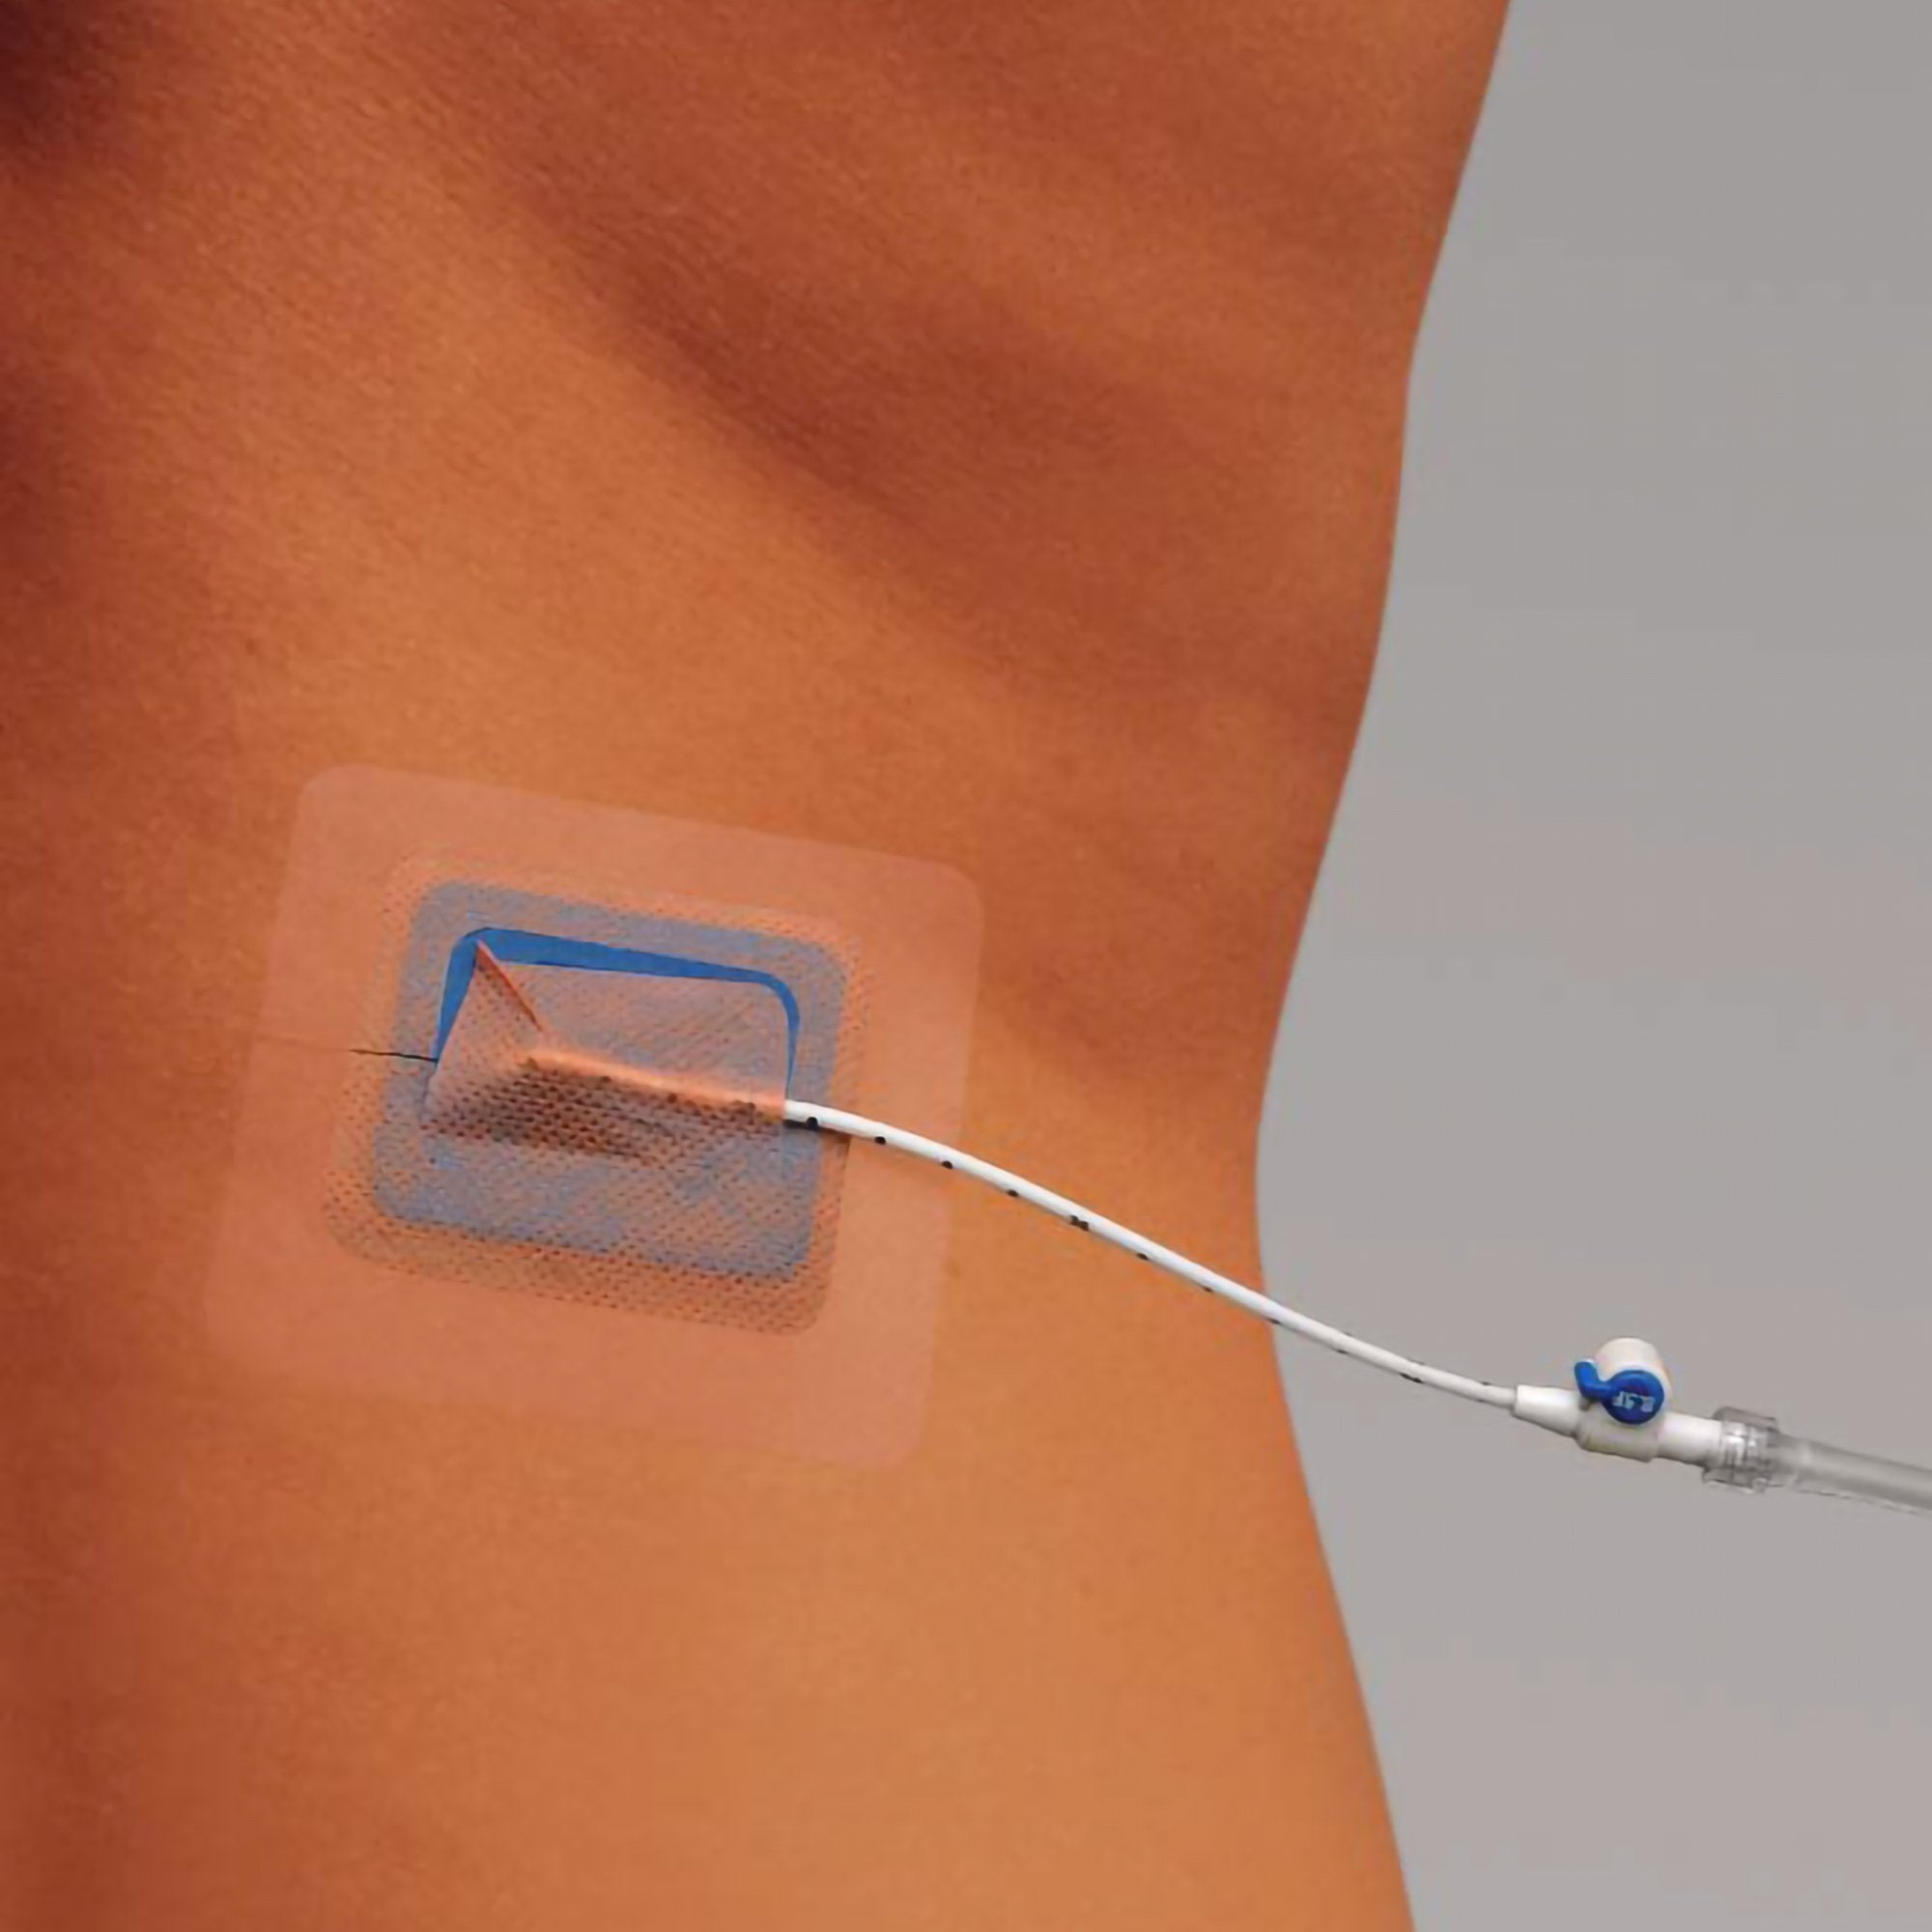 Catheter Fixation Device Stayfix Large, 12 to 22 Fr.